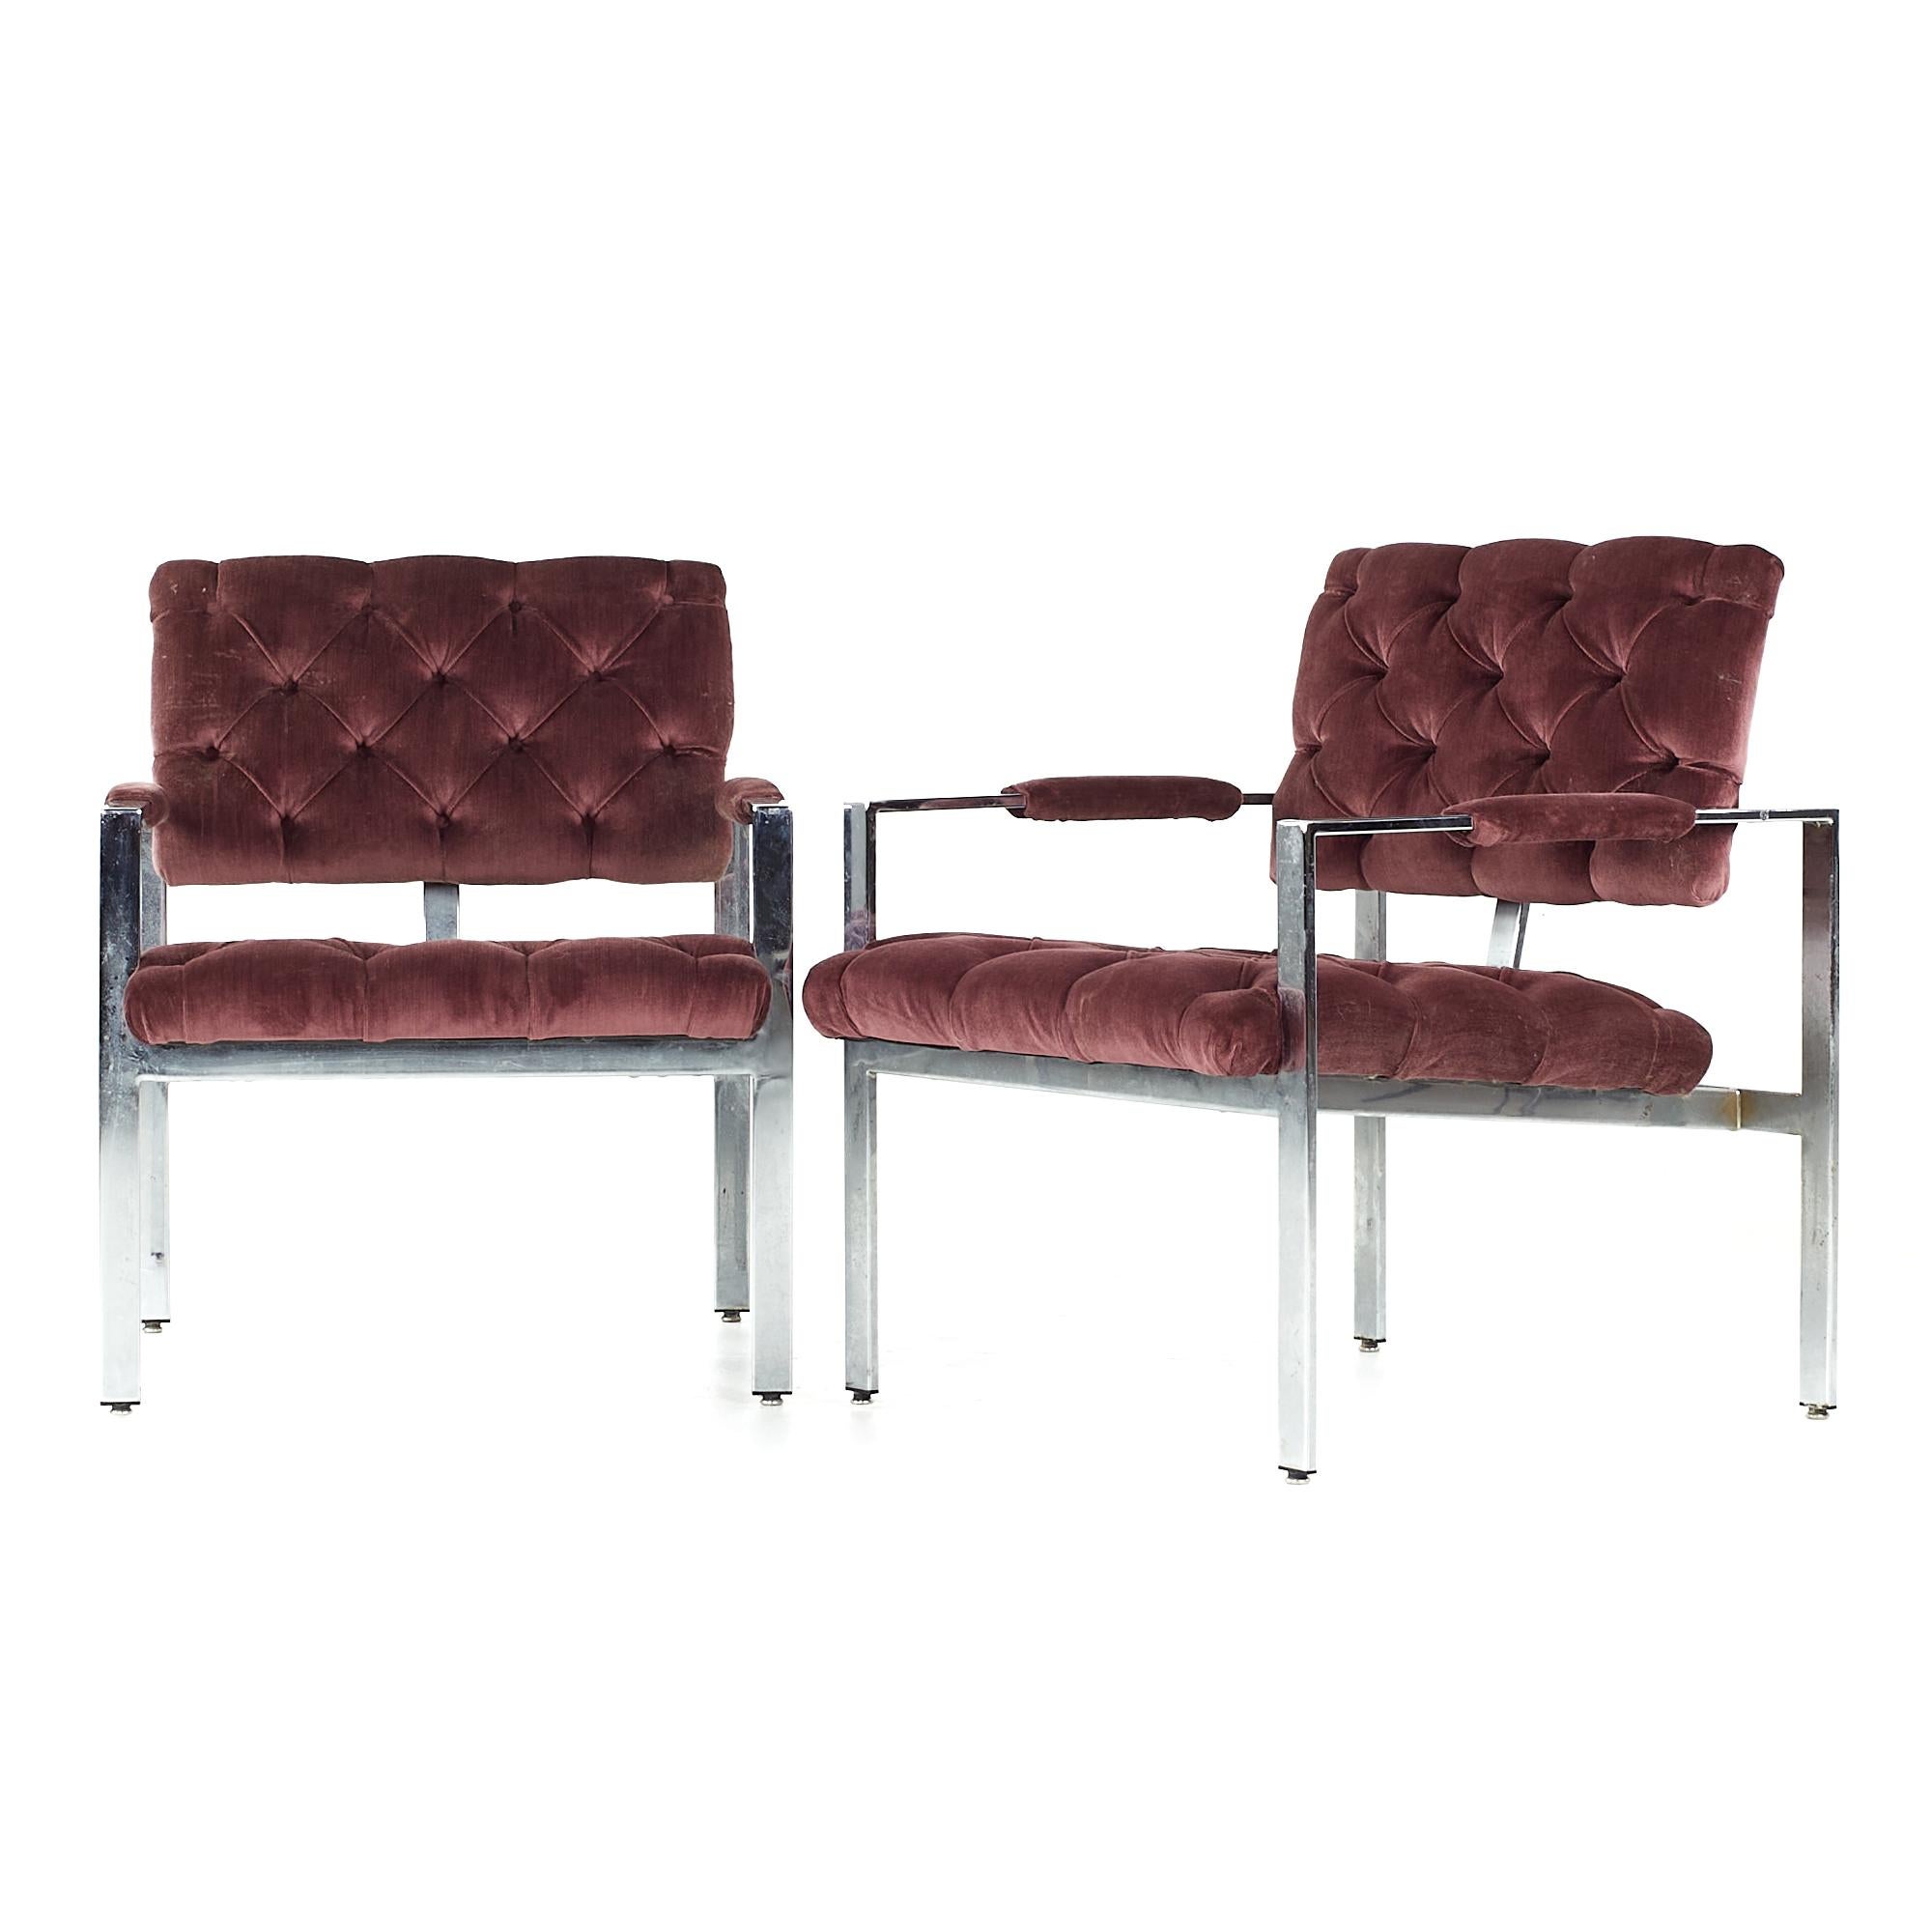 Mid-Century Modern Milo Baughman for Thayer Coggin Midcentury Chrome Tufted Arm Chairs, Pair For Sale